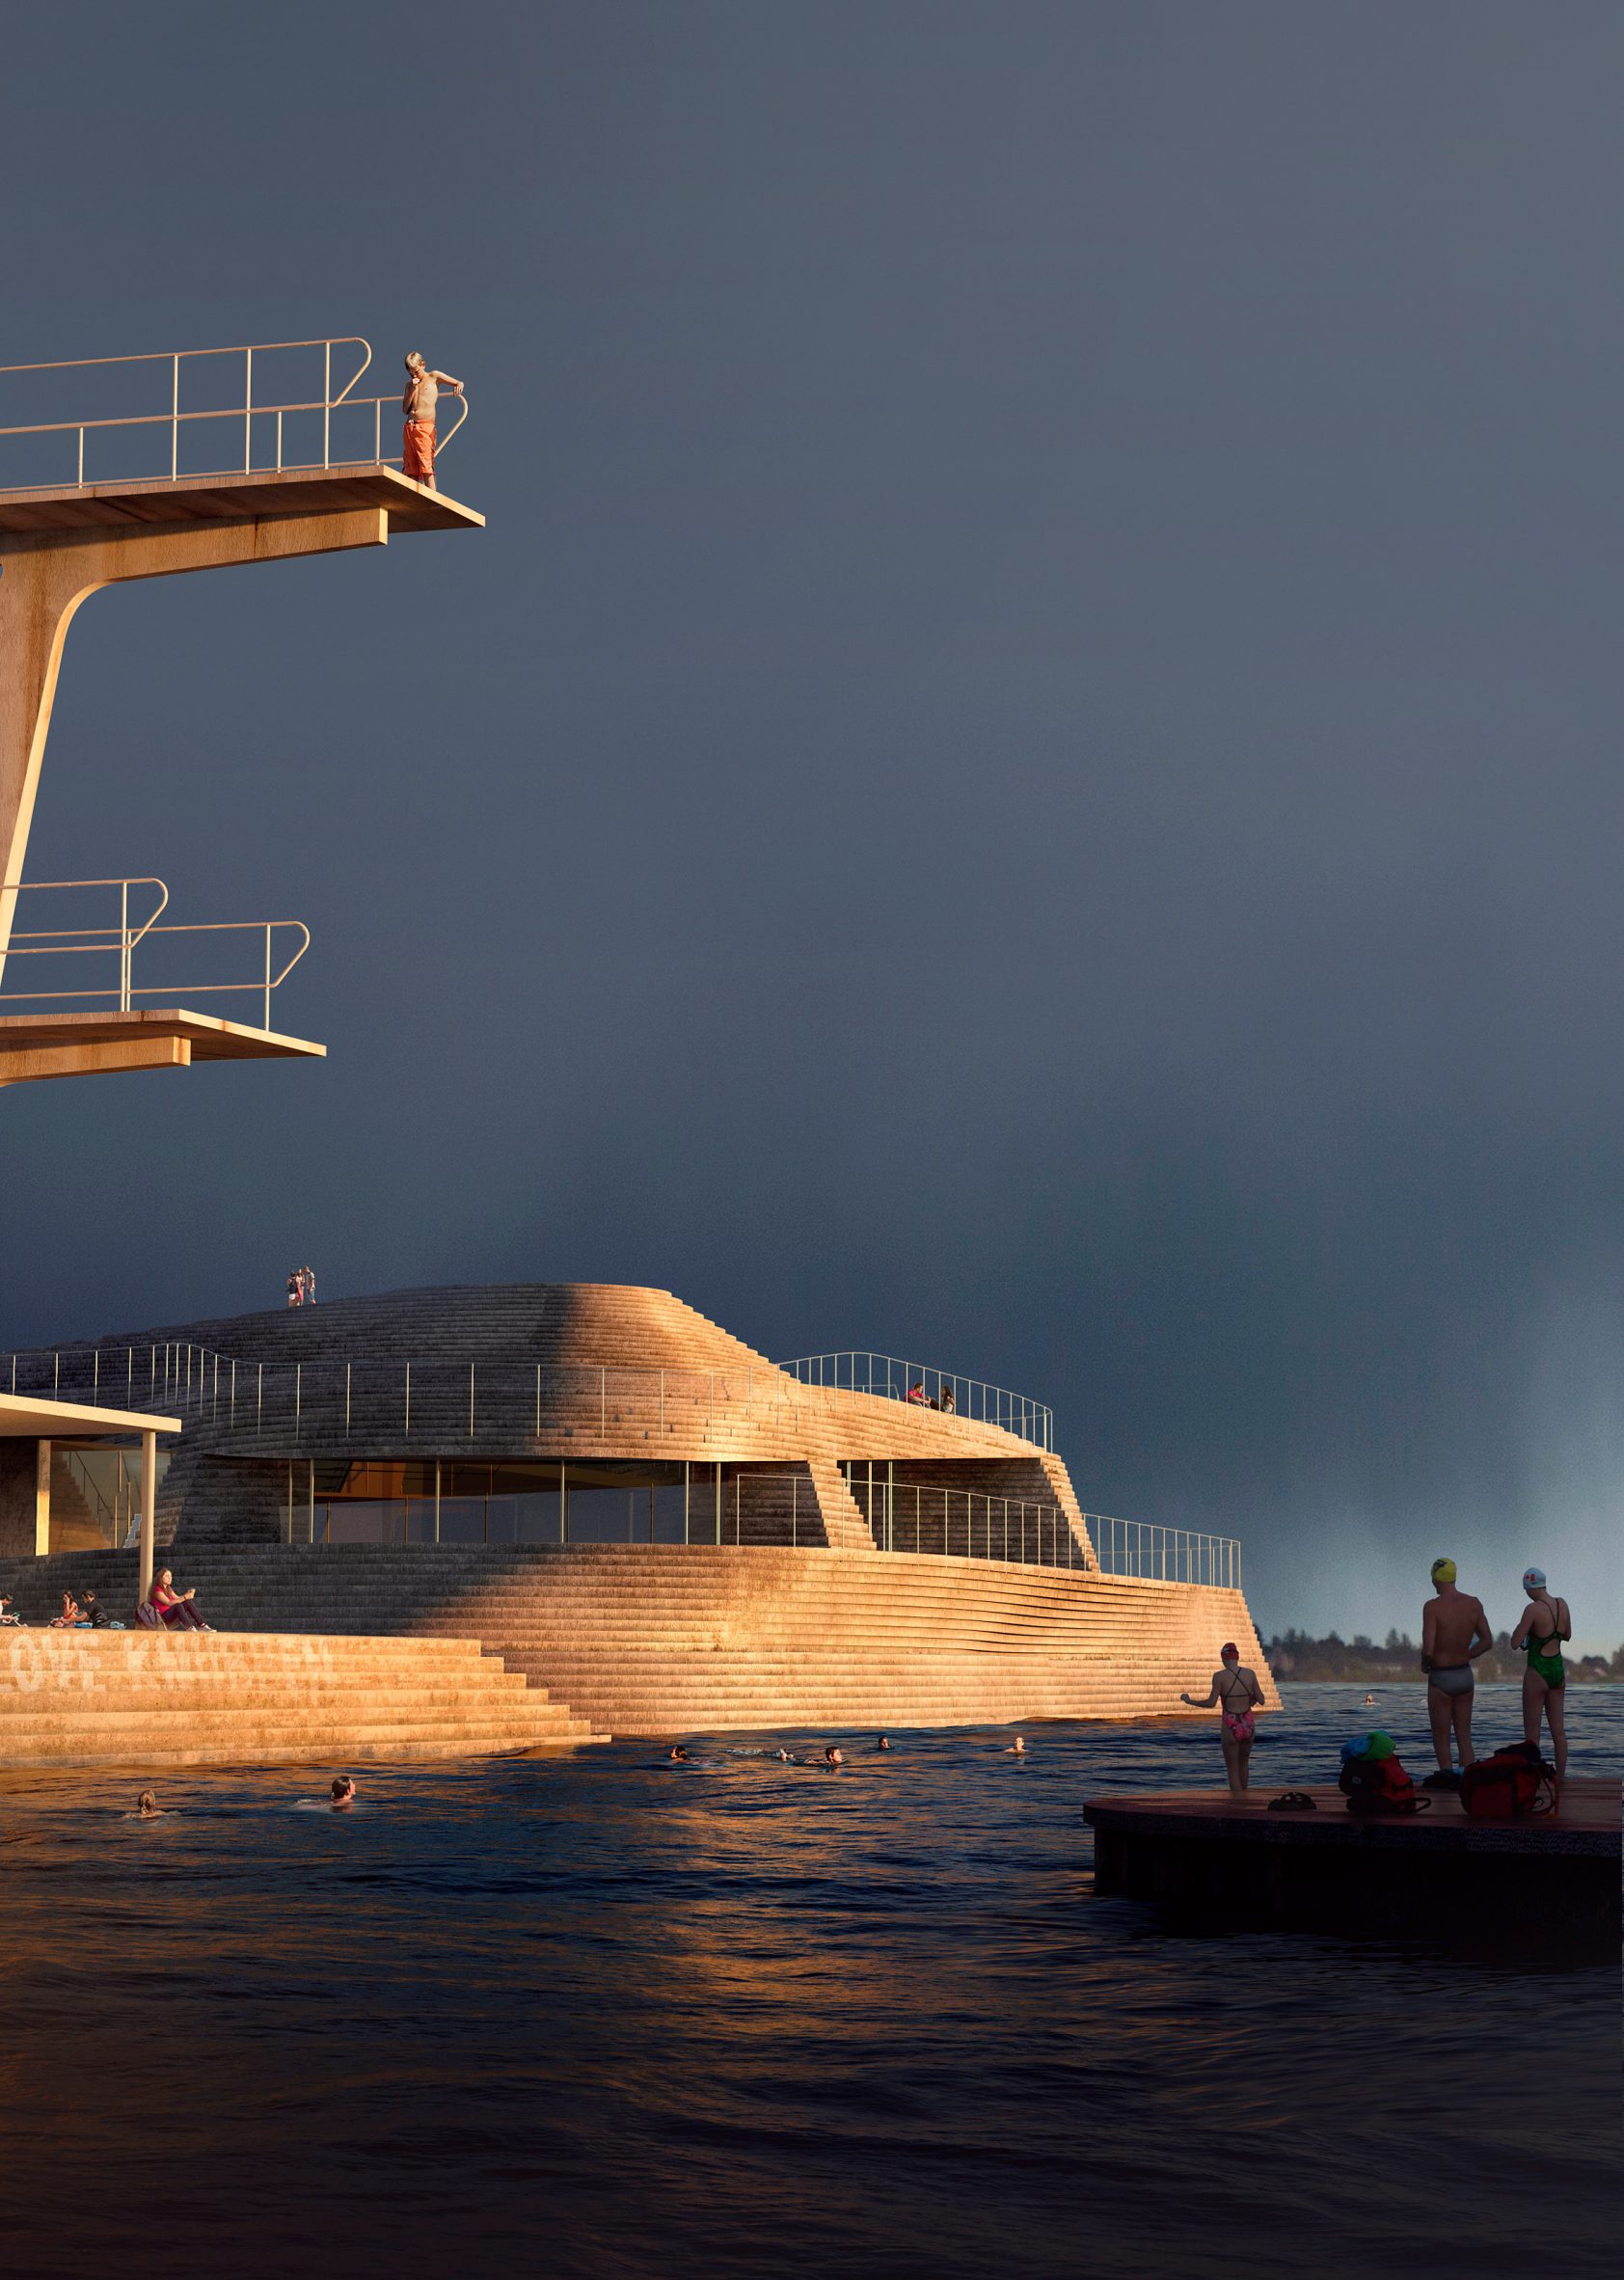 Diving platform and facilities at the new Knubben harbour bath at sunset